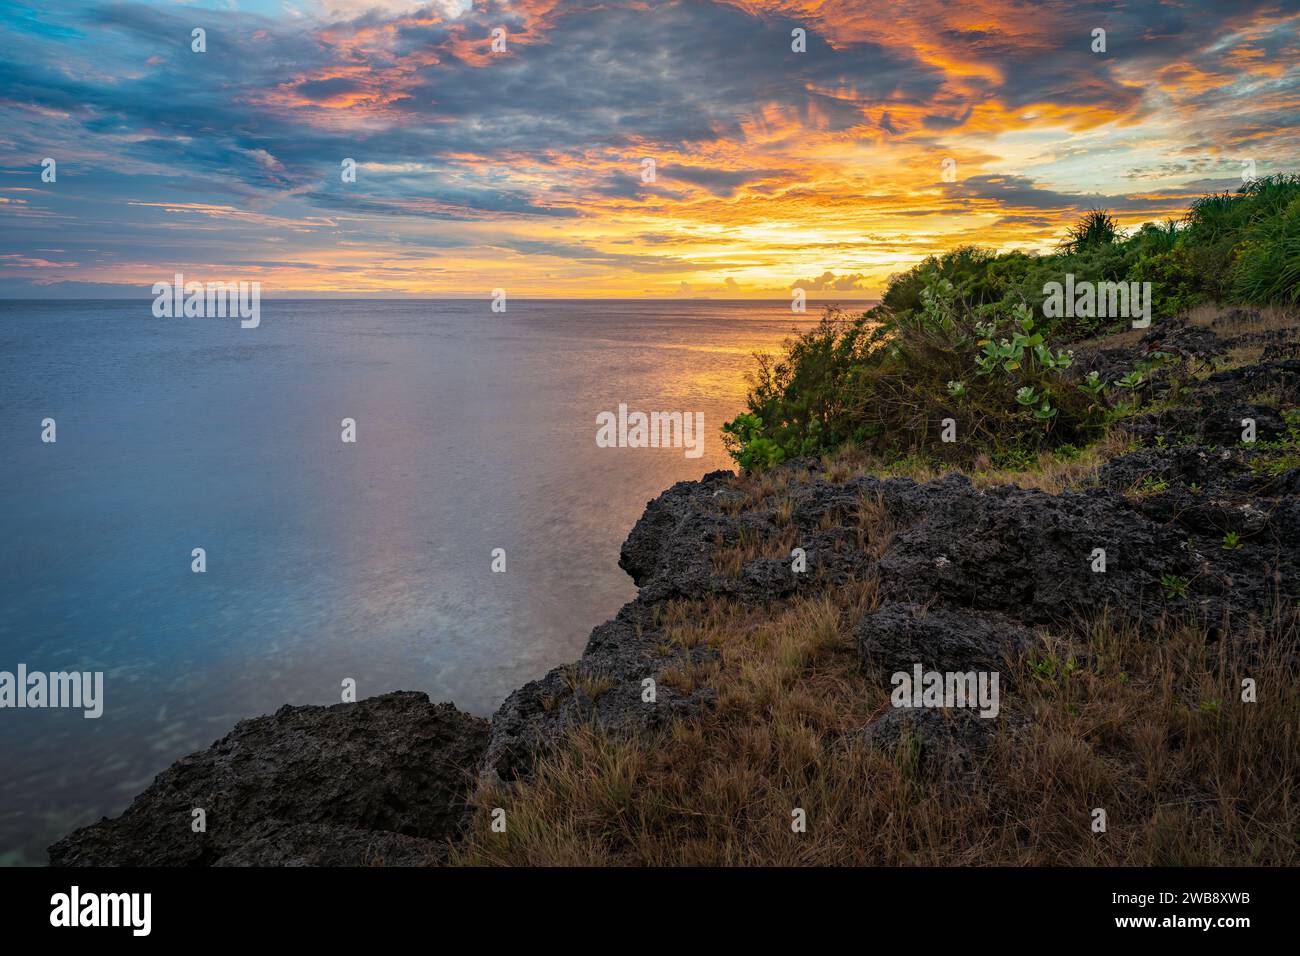 A scenic view of Siquijor island, Philippines at sunset Stock Photo